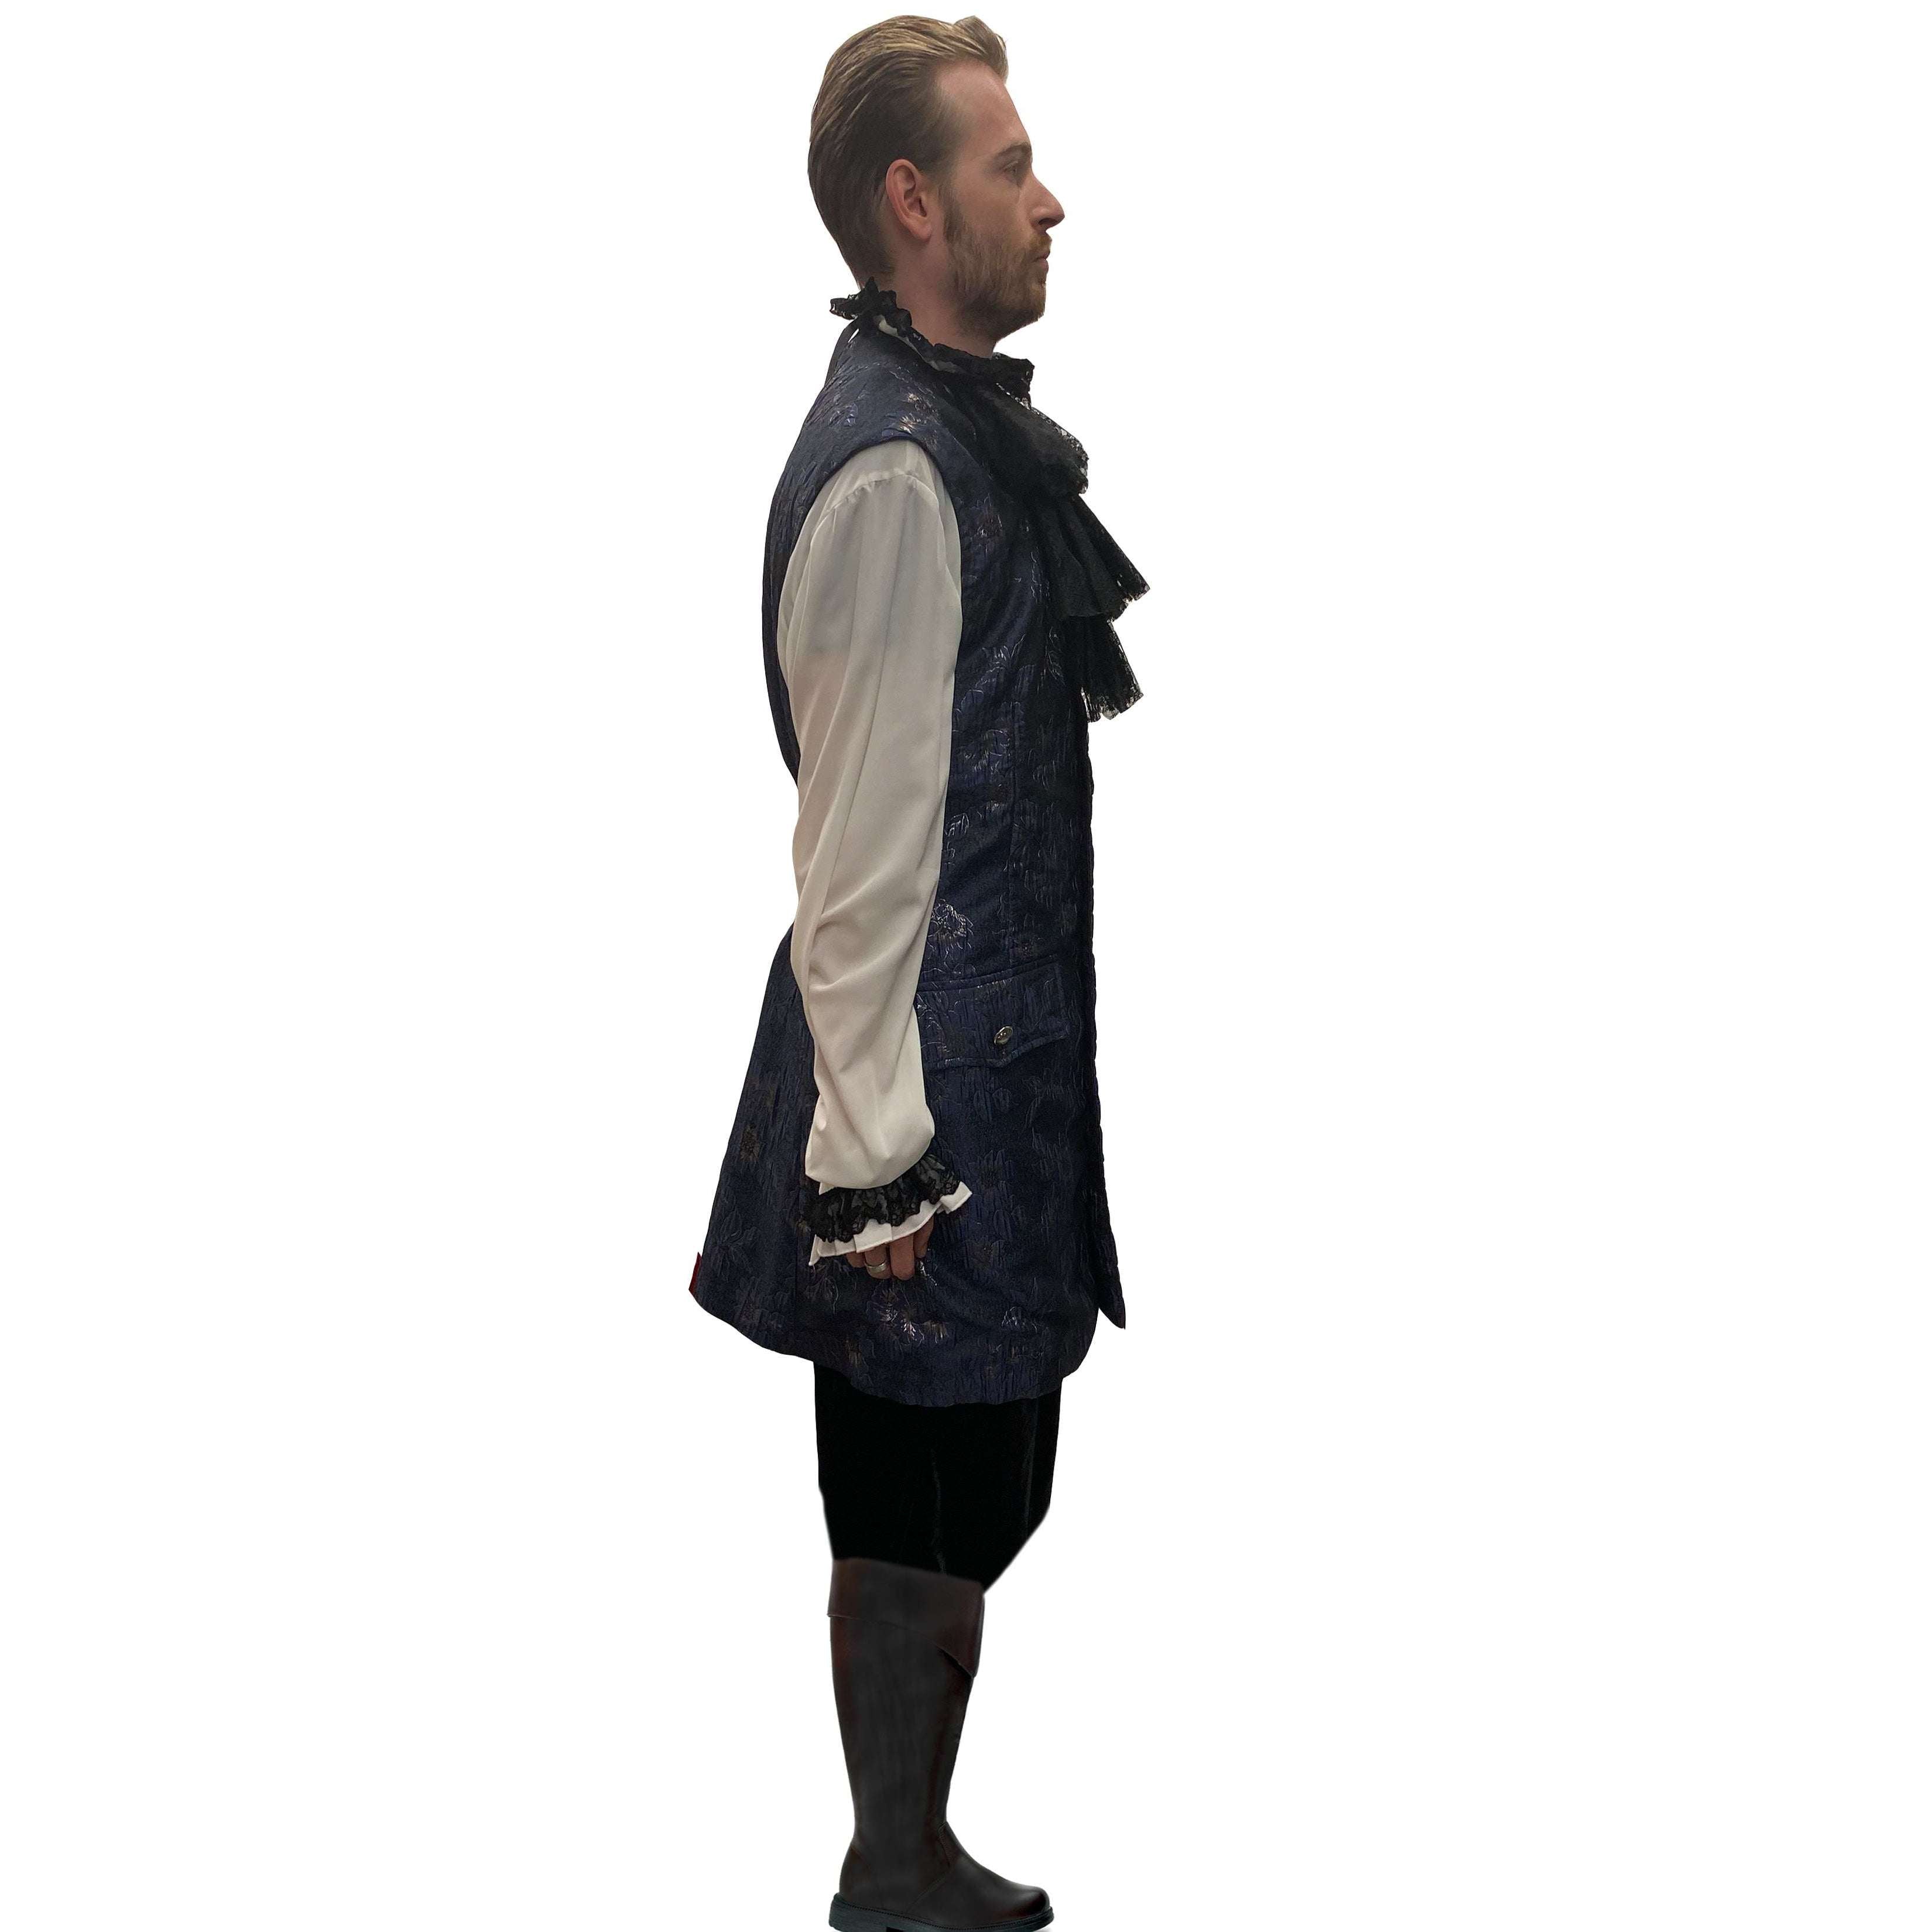 Ultimate High End Navy Colonial Man for Purchase in Size Large